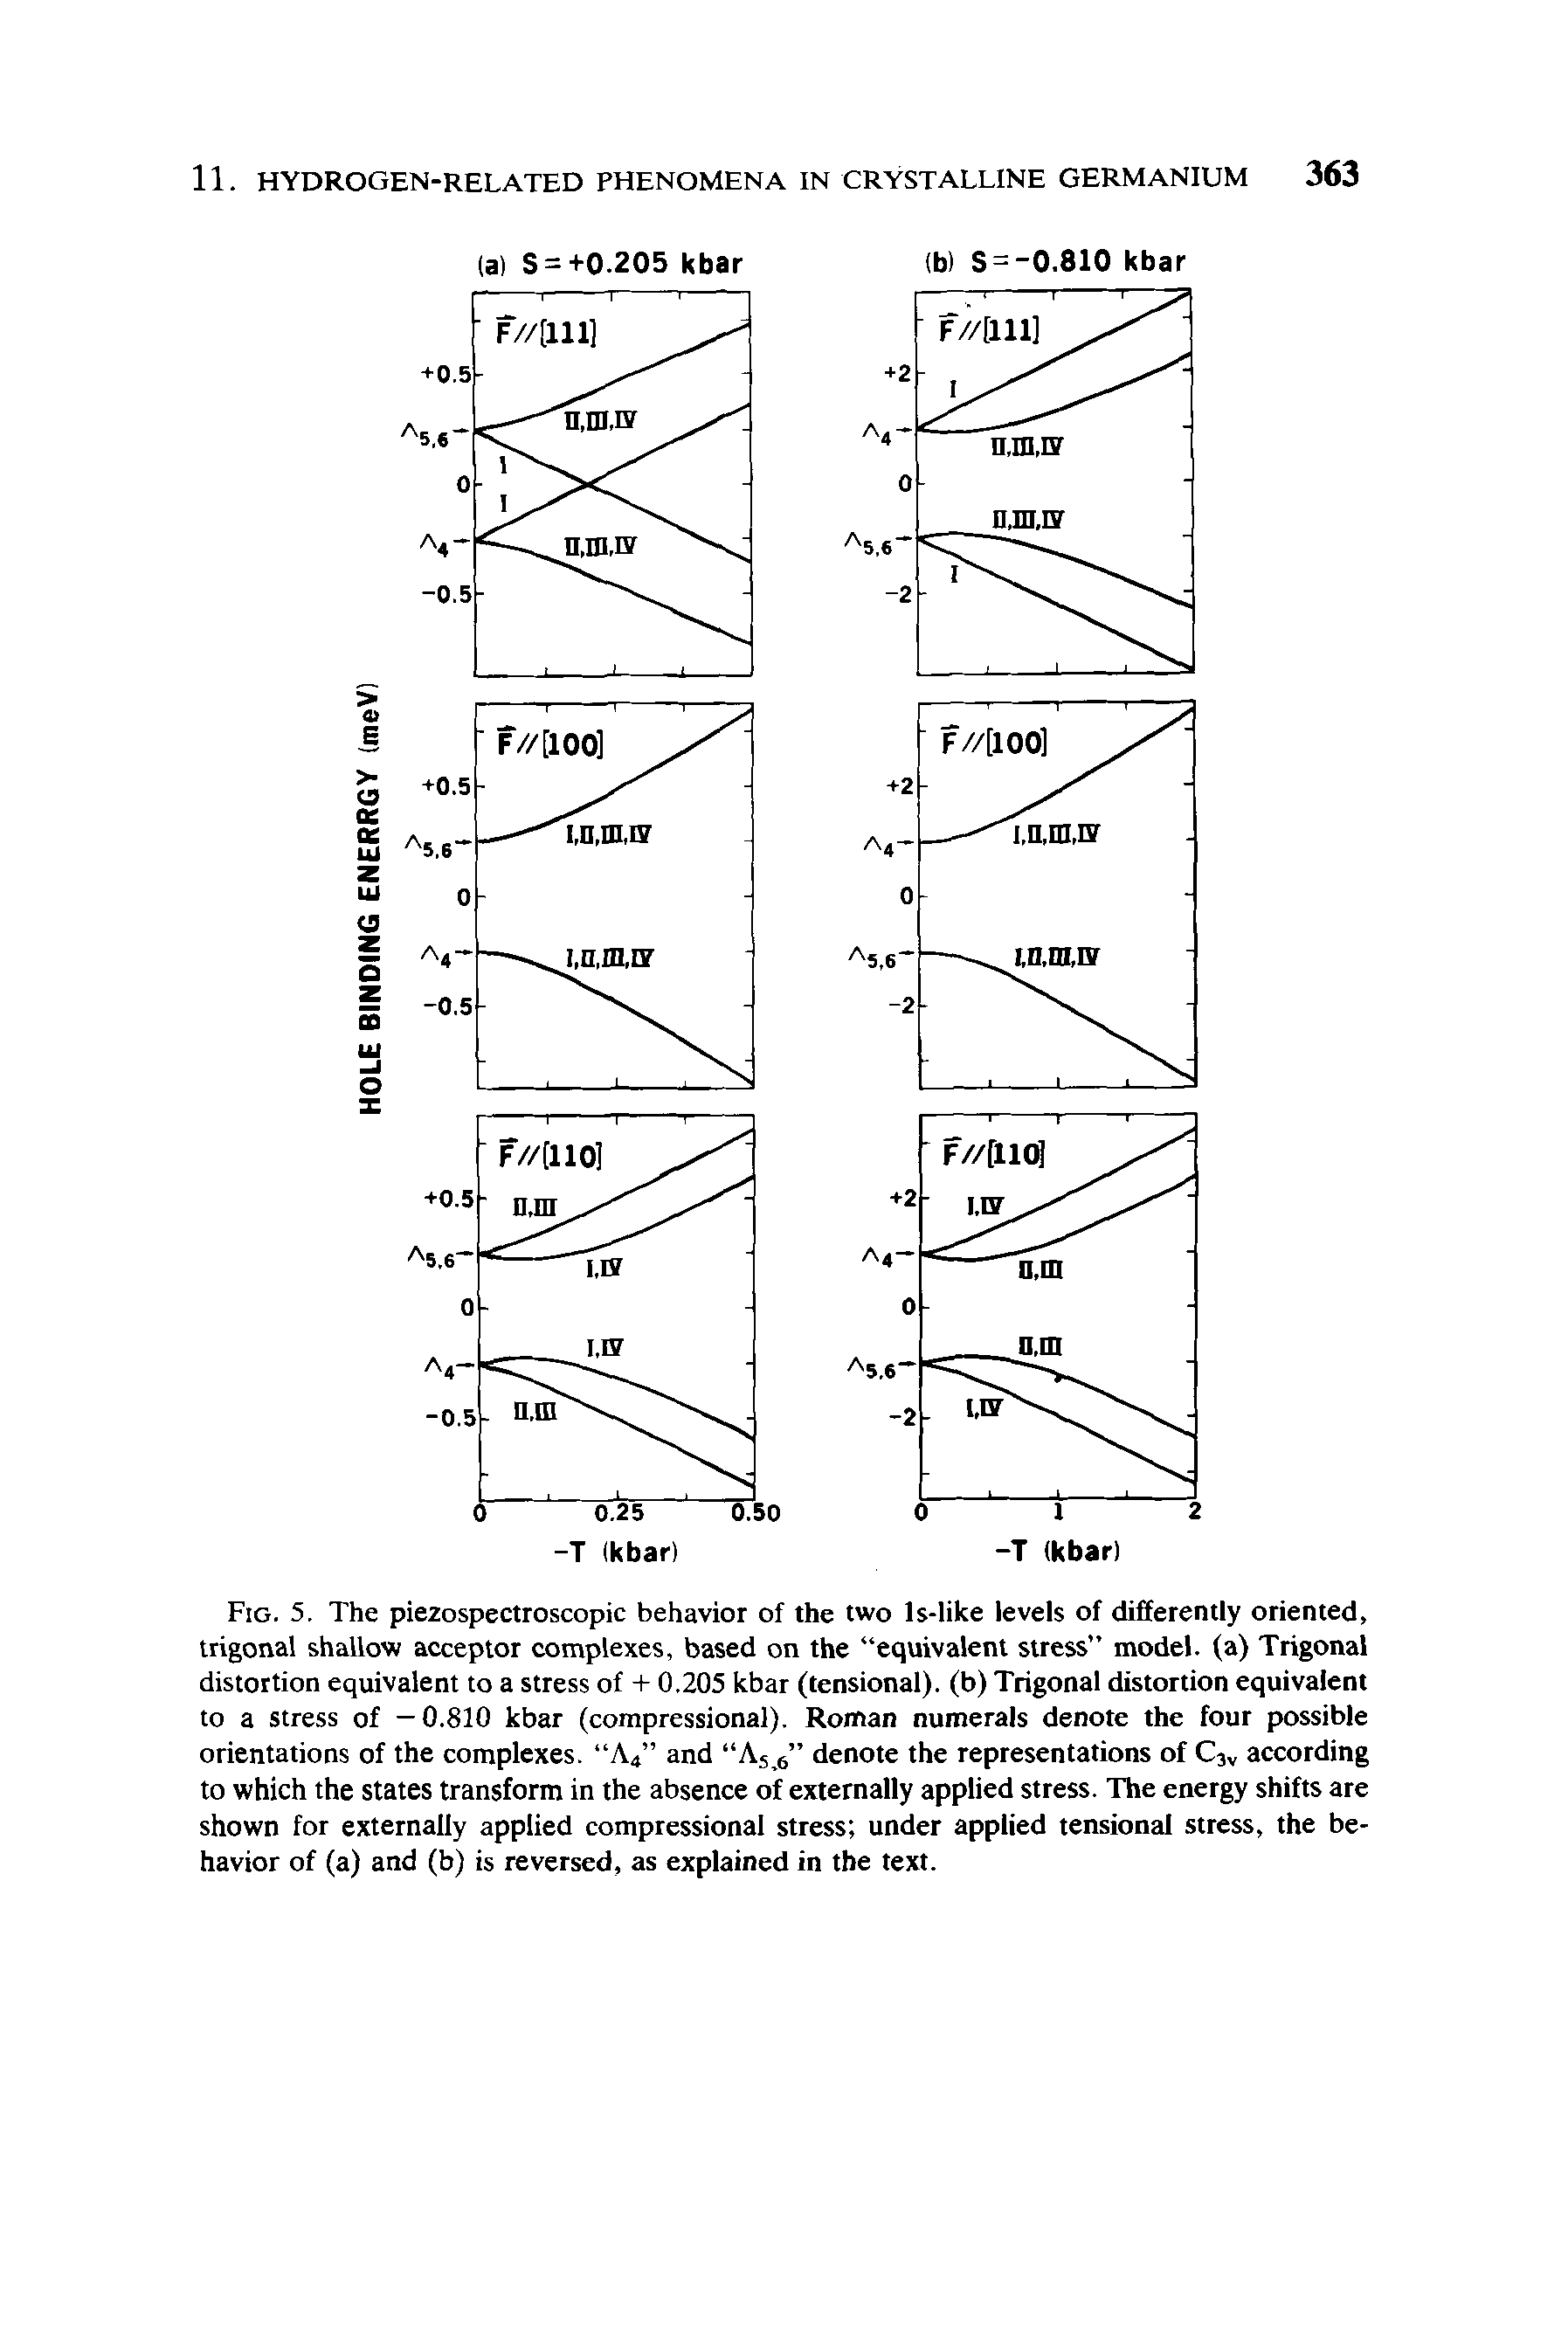 Fig. 5. The piezospectroscopic behavior of the two ls-like levels of differently oriented, trigonal shallow acceptor complexes, based on the equivalent stress model, (a) Trigonal distortion equivalent to a stress of + 0.205 kbar (tensional). (b) Trigonal distortion equivalent to a stress of —0.810 kbar (compressional). Roman numerals denote the four possible orientations of the complexes. A4 and A5 6 denote the representations of C3v according to which the states transform in the absence of externally applied stress. The energy shifts are shown for externally applied compressional stress under applied tensional stress, the behavior of (a) and (b) is reversed, as explained in the text.